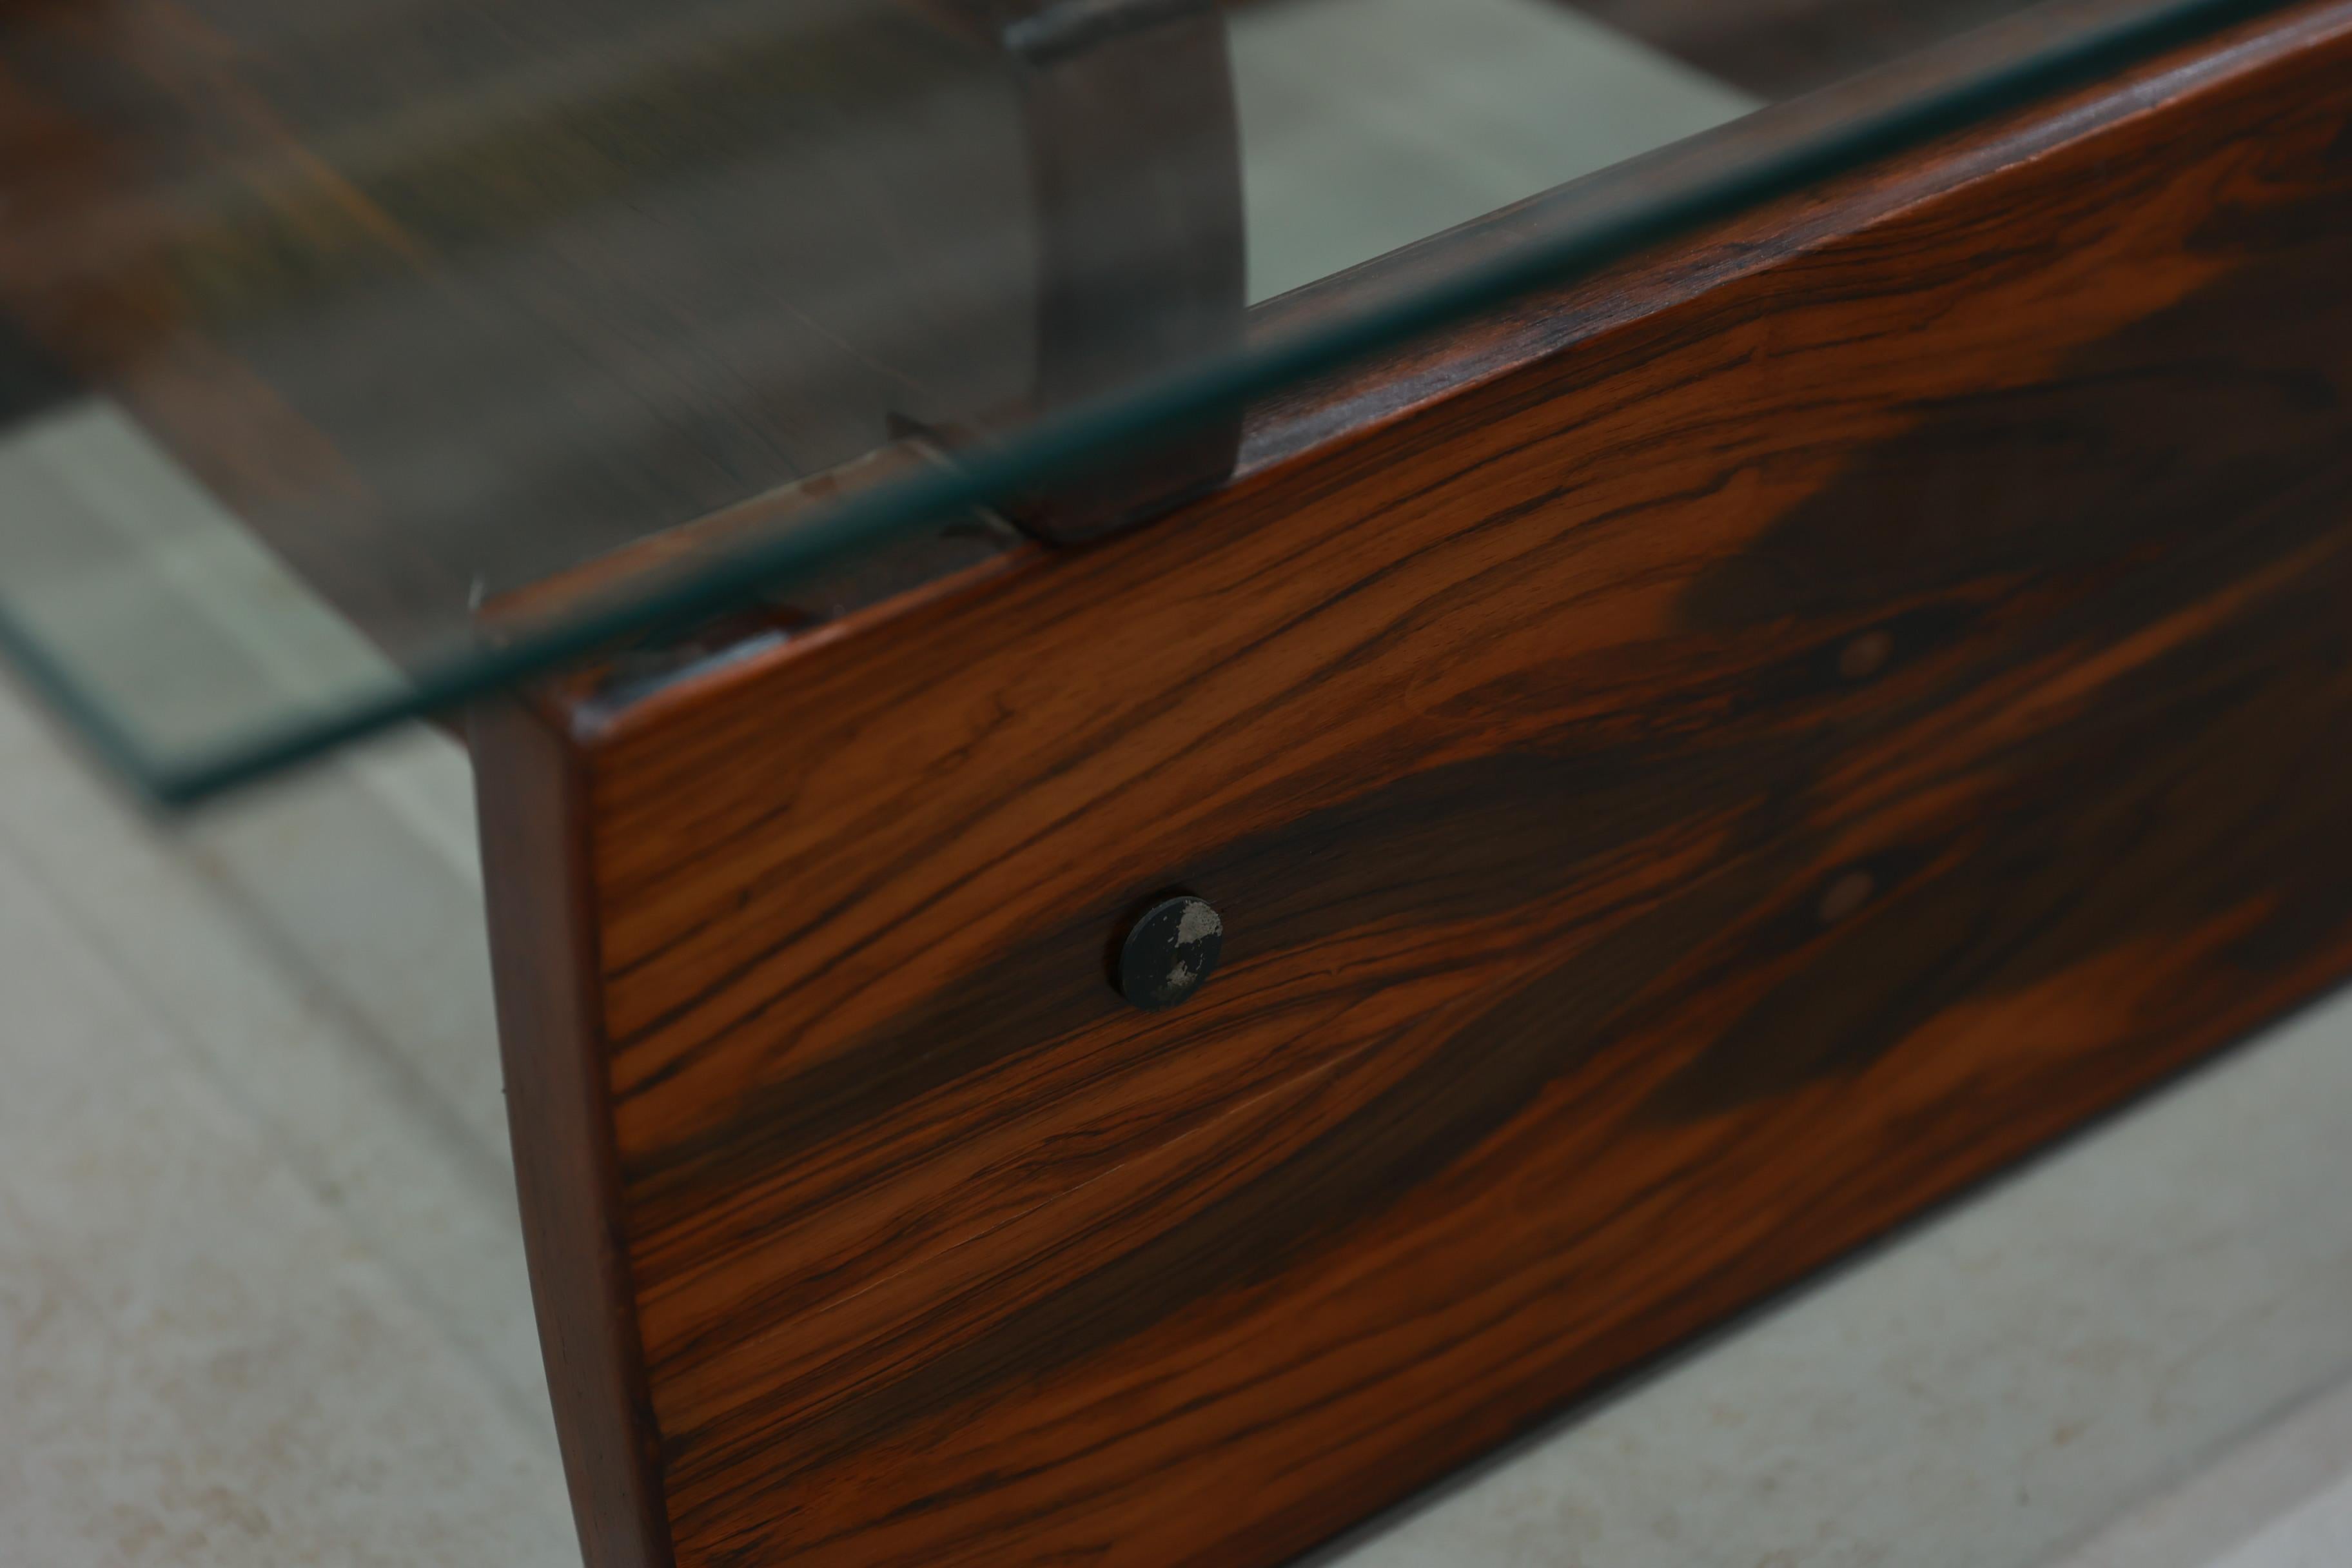 Hand-Crafted Mid-century Modern Coffee Table in Hardwood and Glass, Sergio Rodrigues, Brazil For Sale